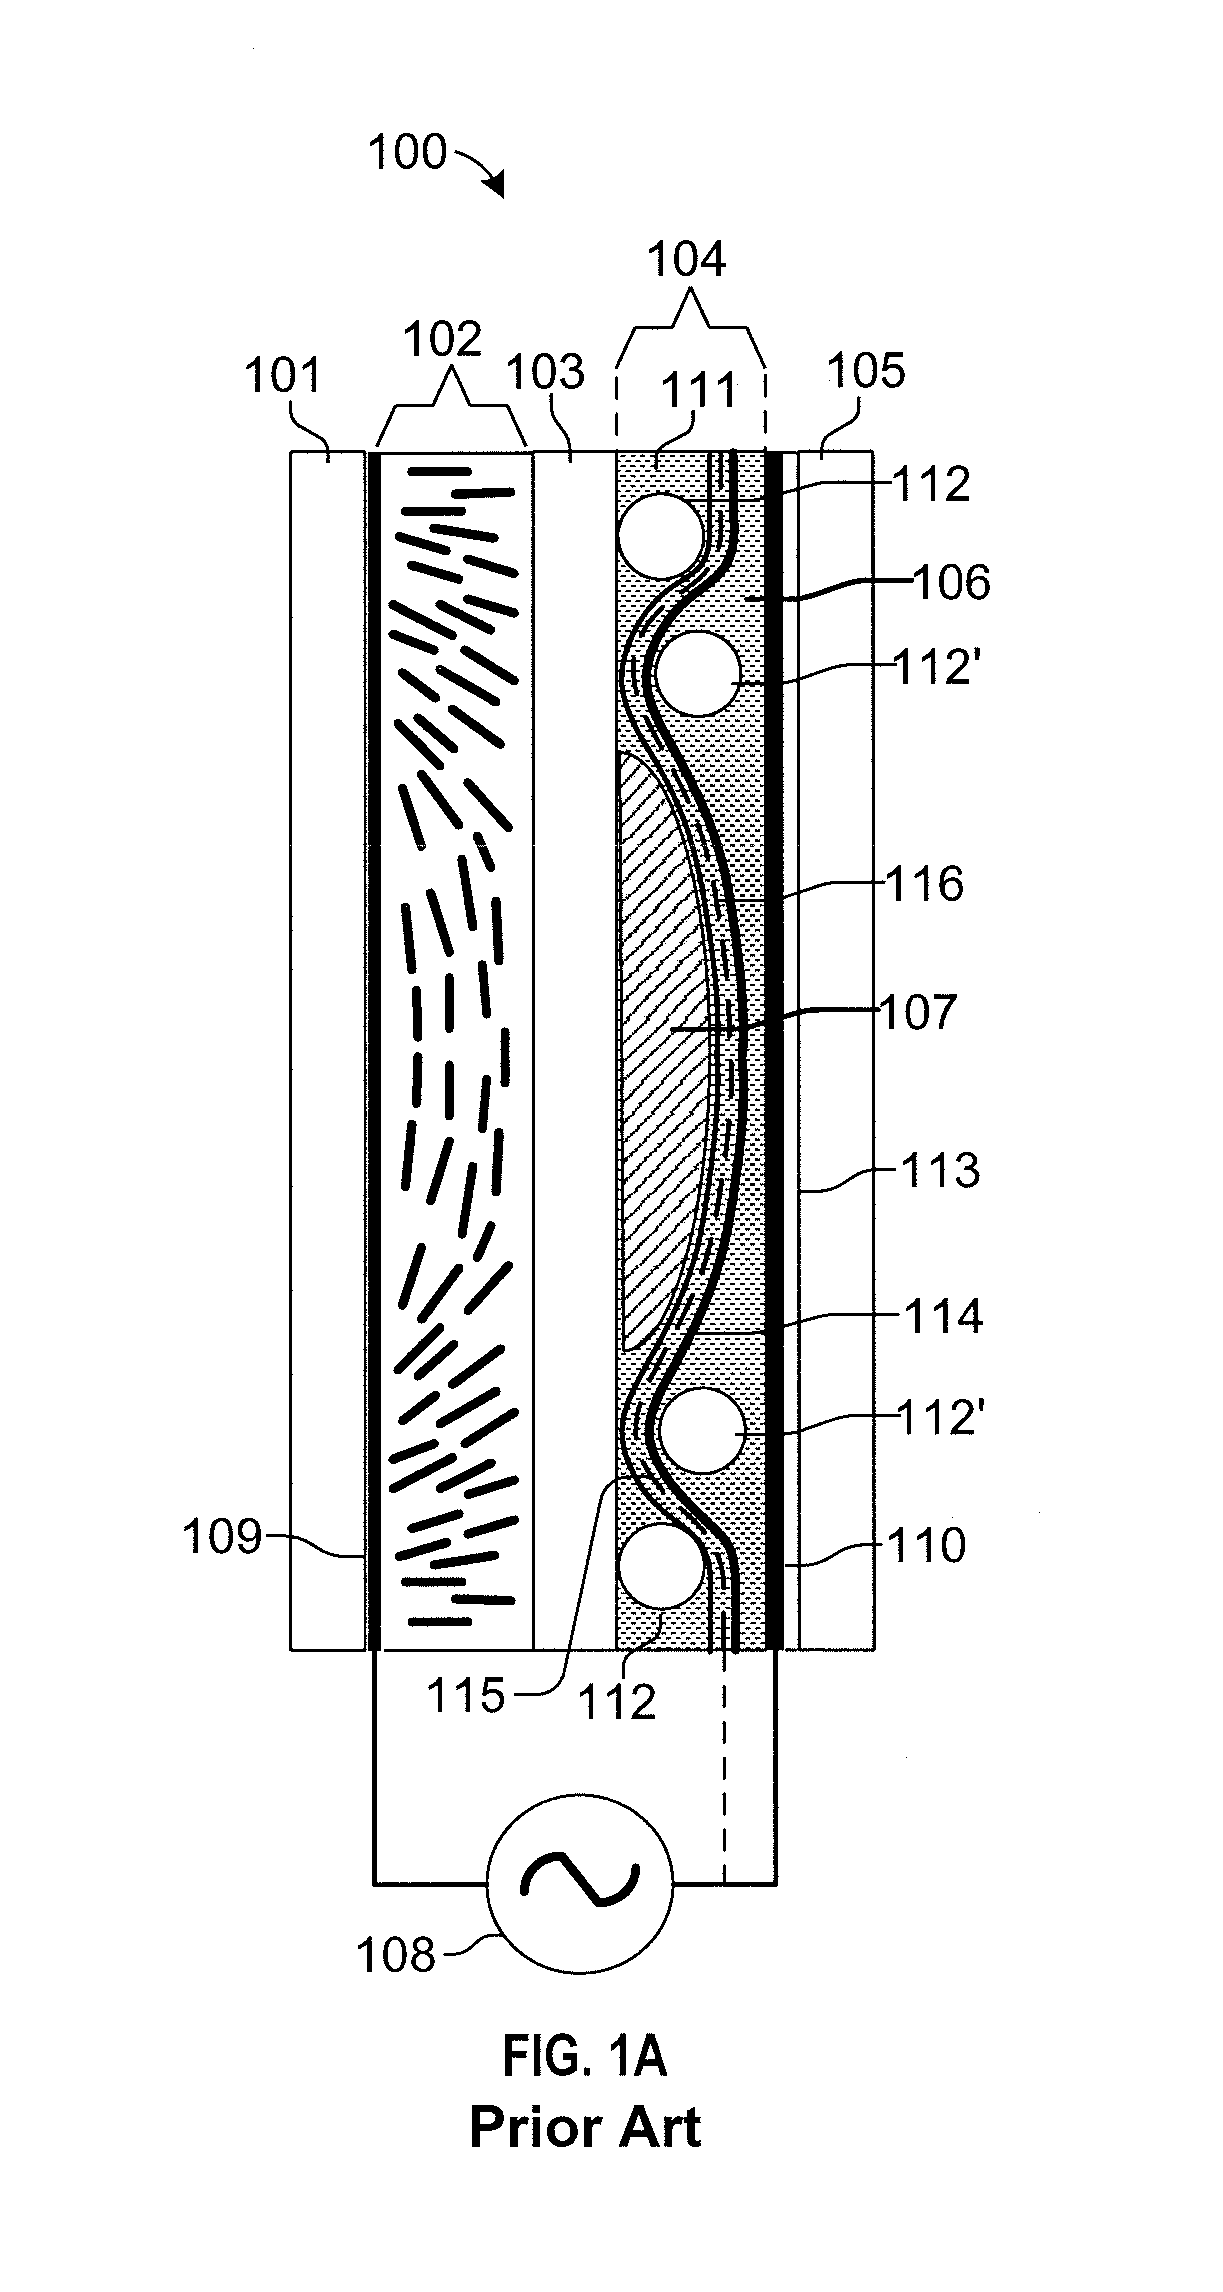 Optical device with electrically variable extended depth of field